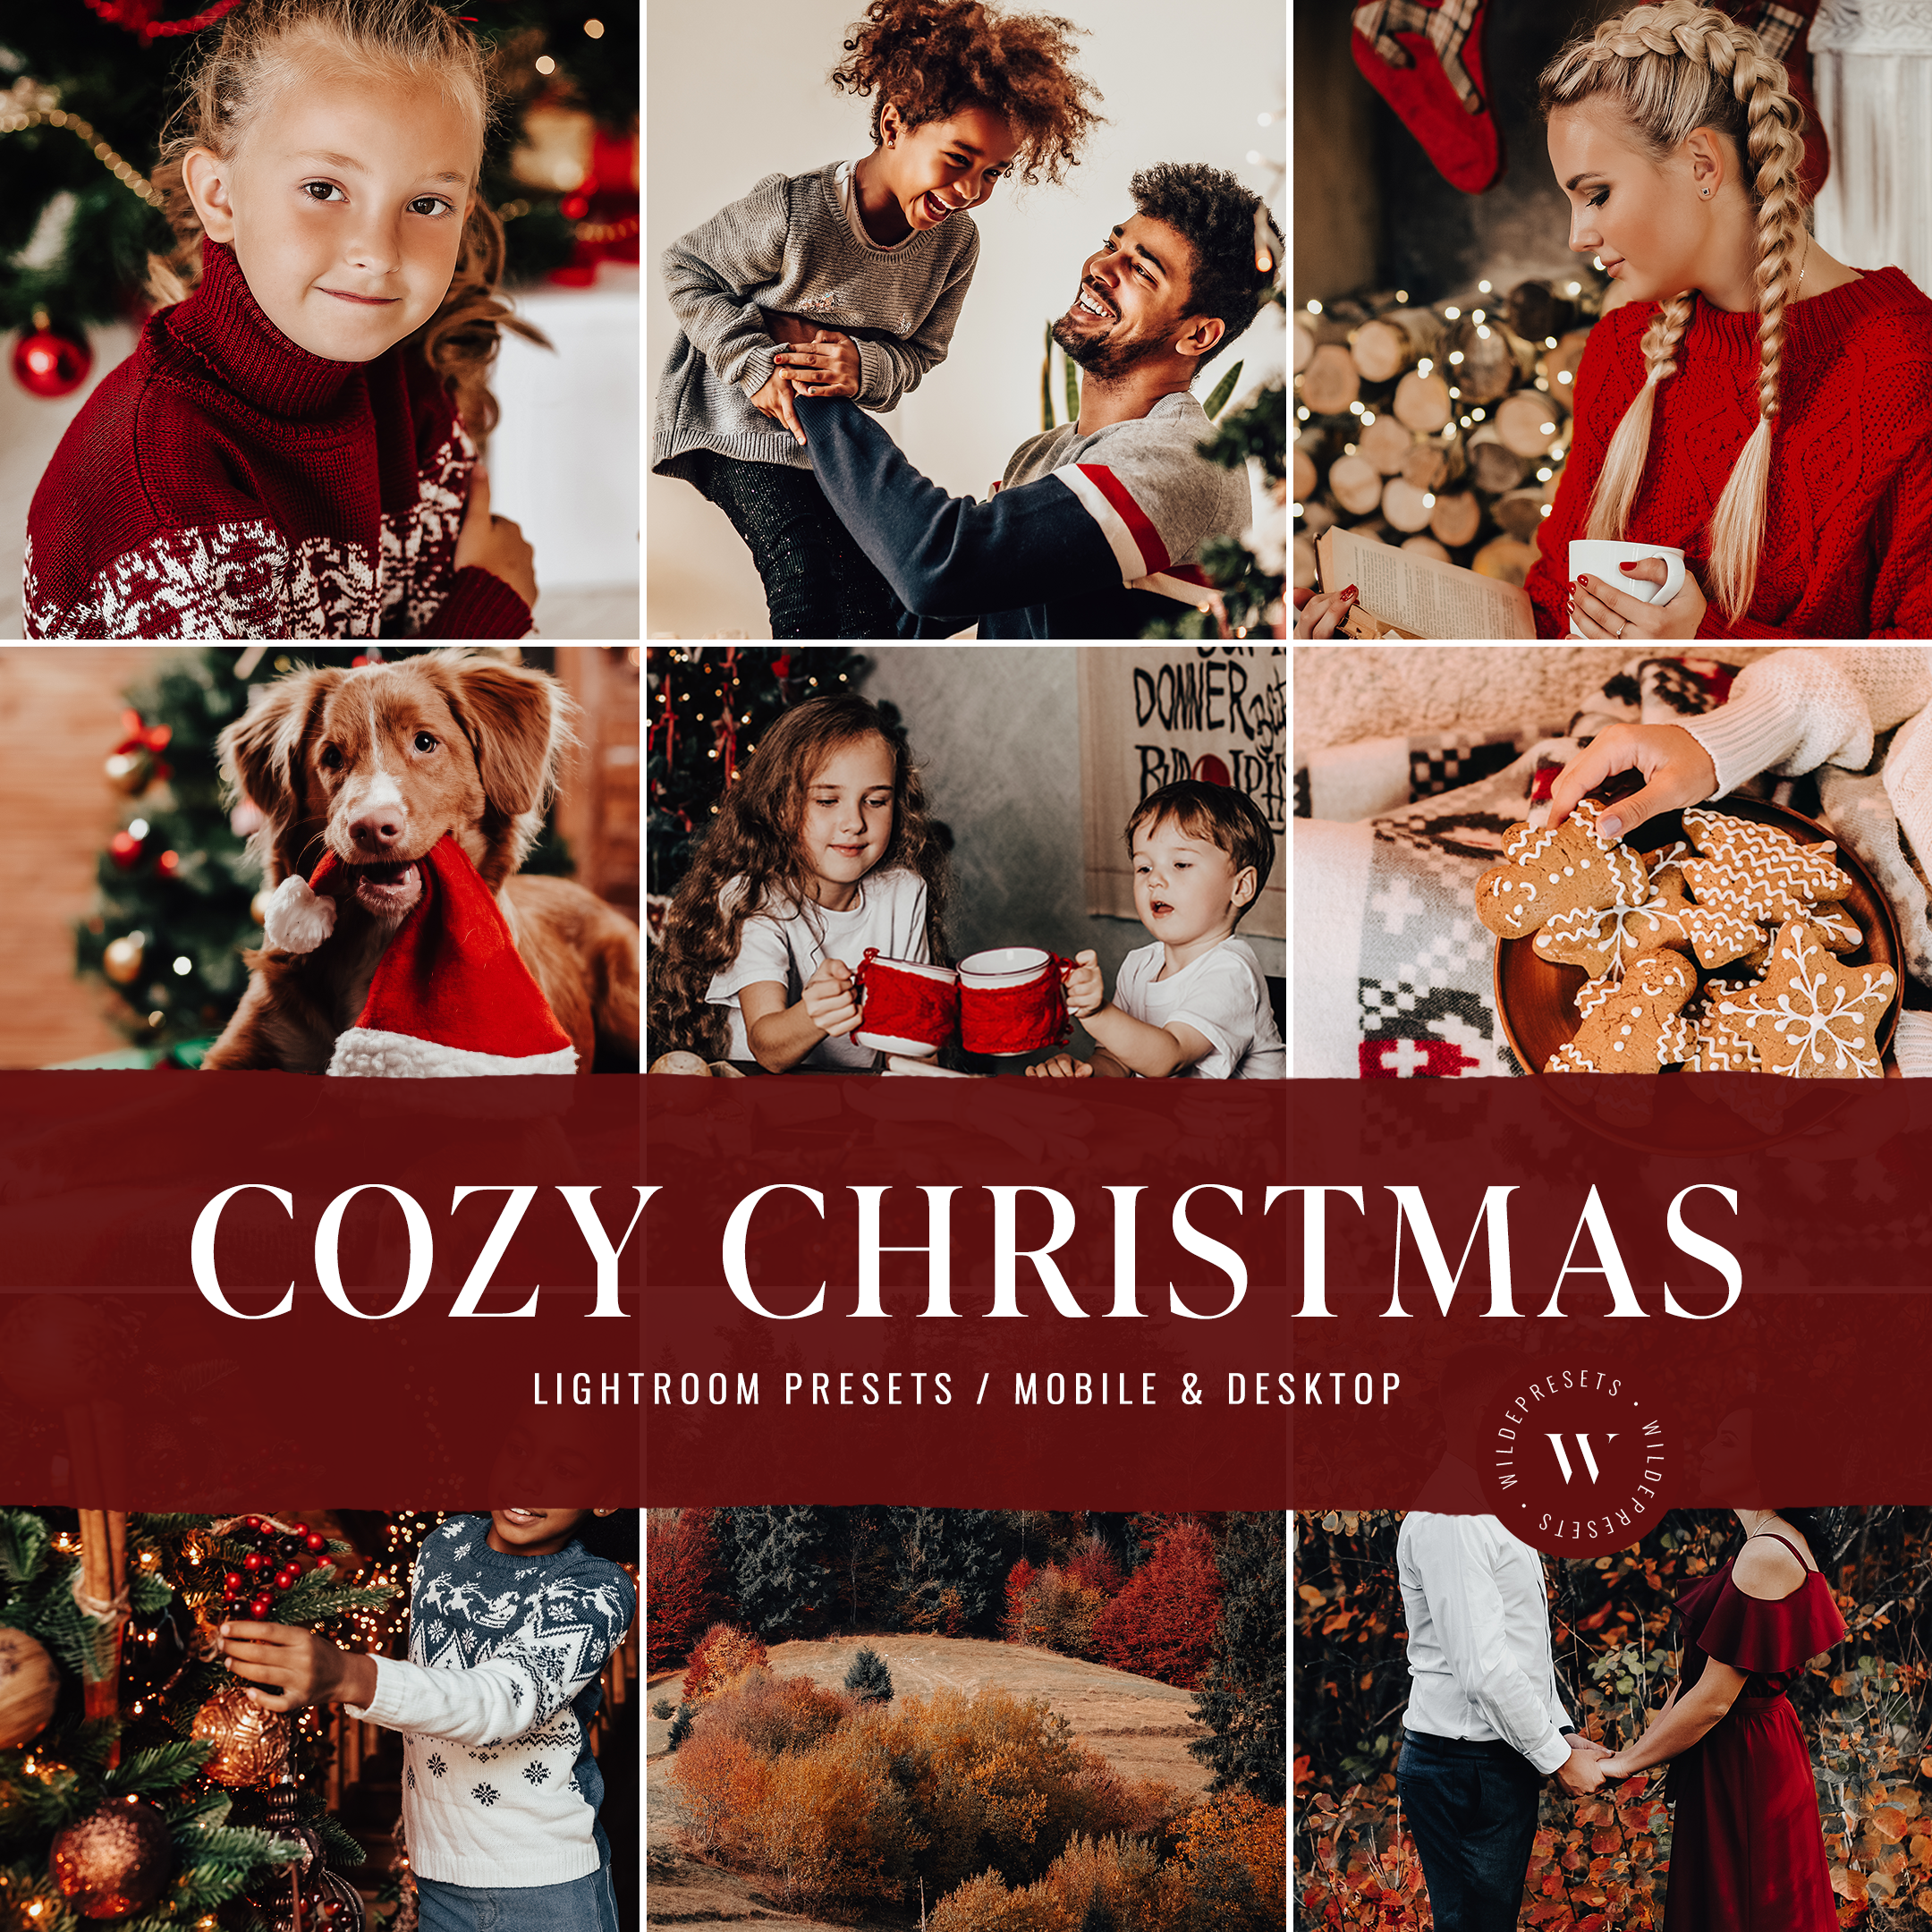 The Cozy Christmas Preset Collection